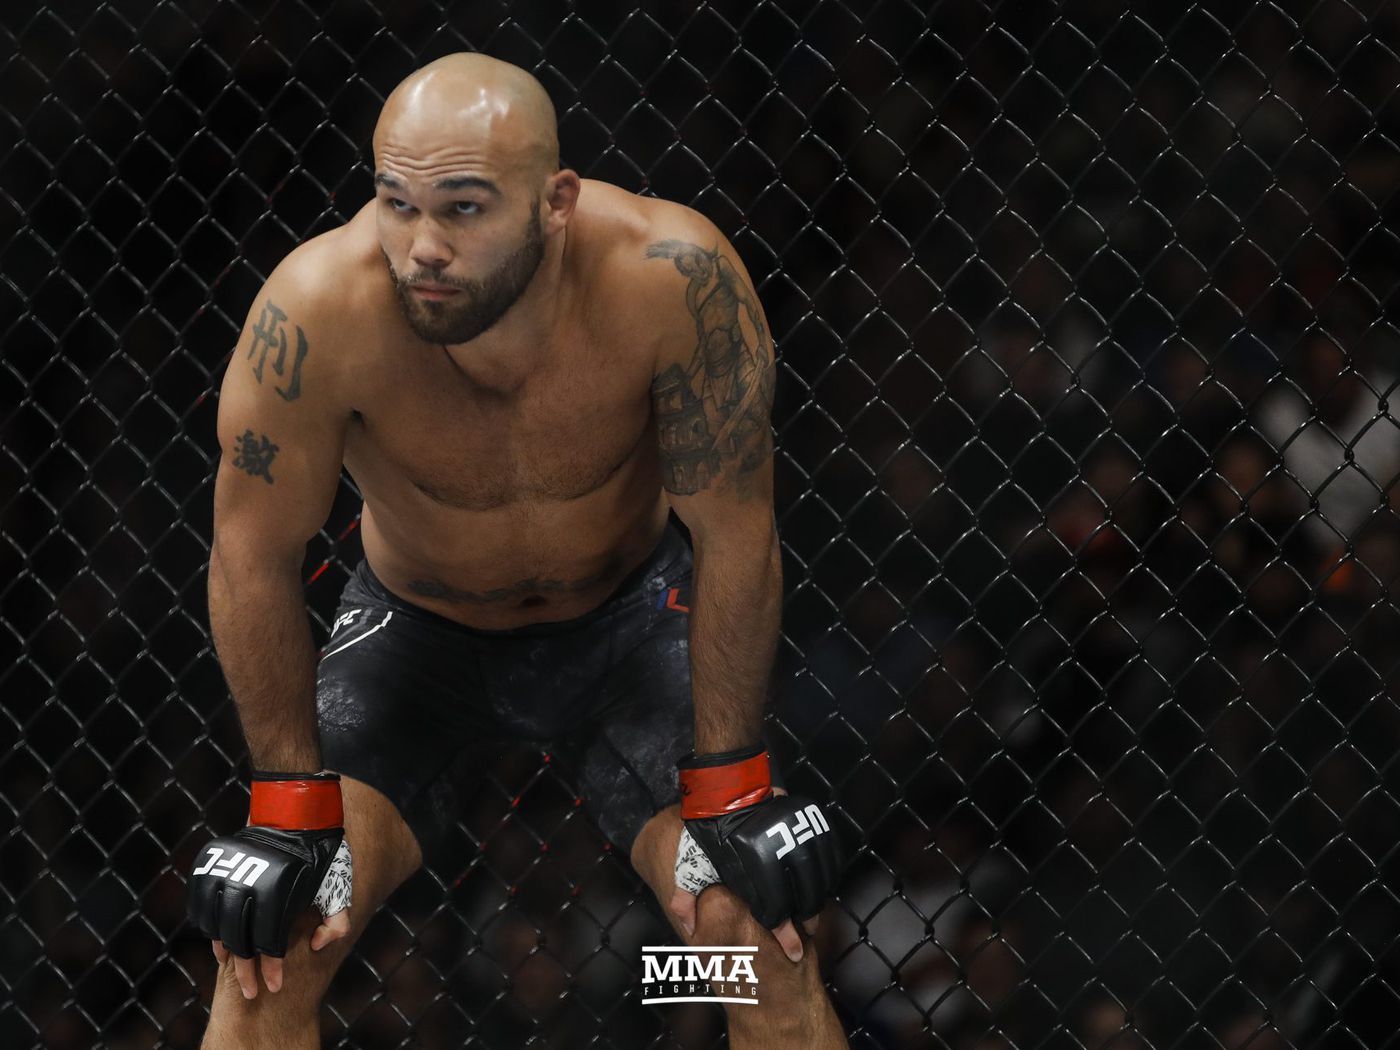 After 'tedious' rehab, Robbie Lawler is ready to be 'Ruthless' again